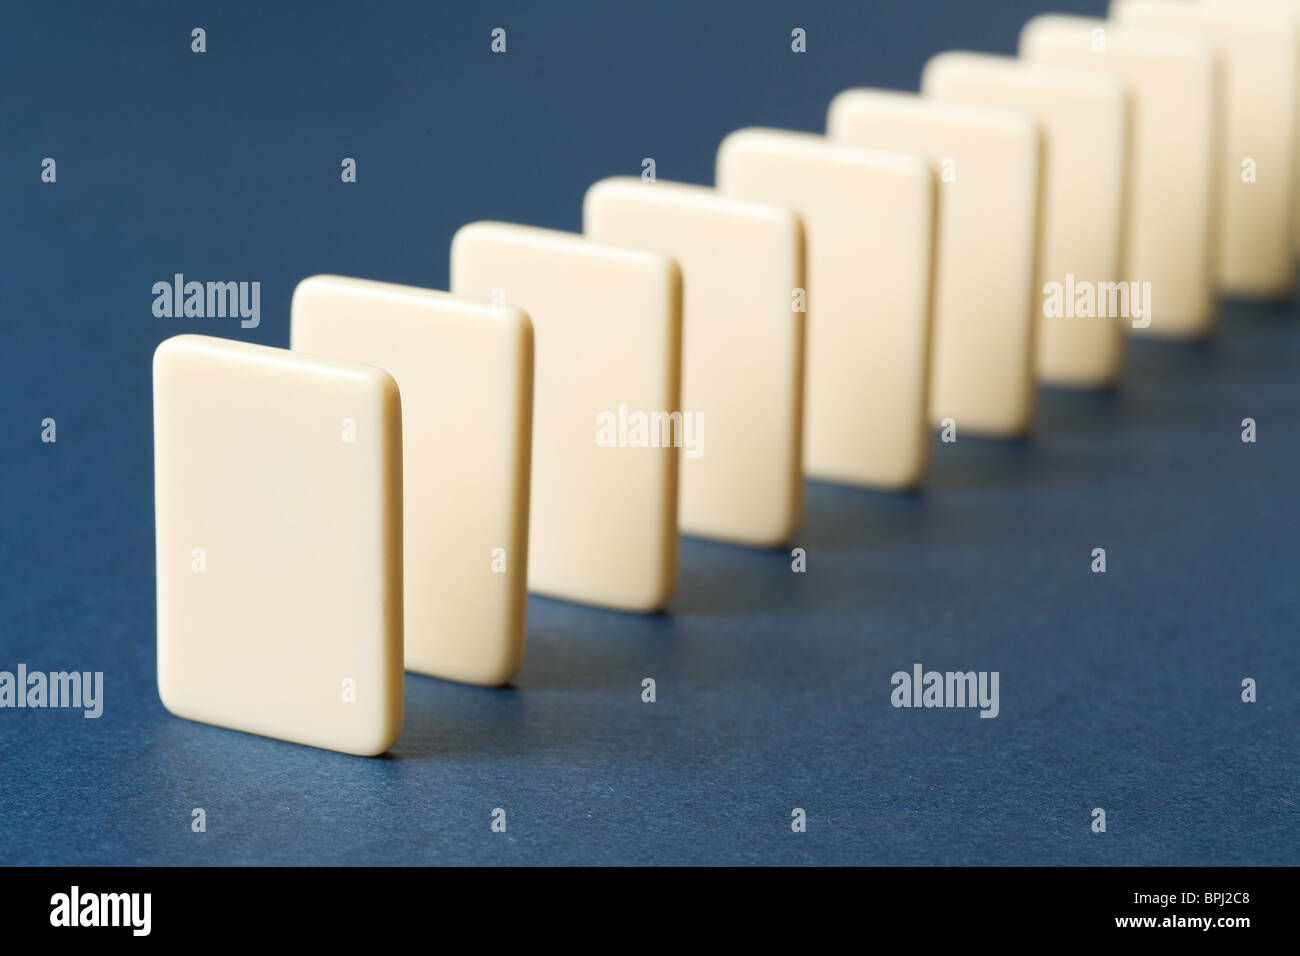 Domino with blue background, Concept of Cause or Teamwork Stock Photo